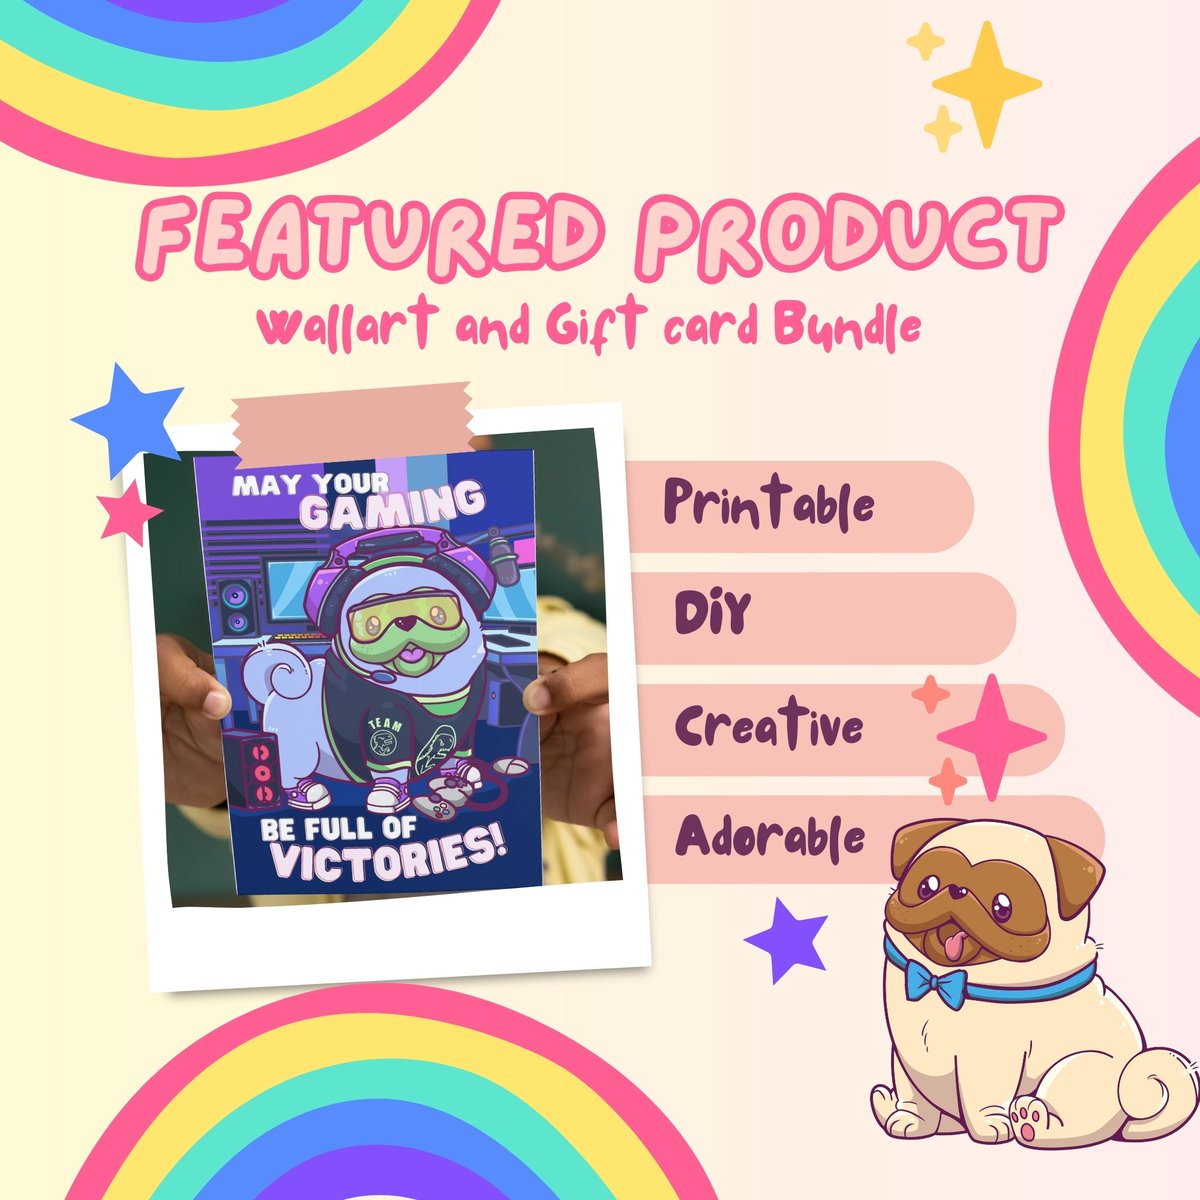 Level up your decor with our Gamer Pug Bundle Printable on Etsy! 🎮 An adorable project waiting for you. Get creative with Dali Pug today! 🐾 Find it here: etsy.com/listing/144114…
🐶
#DaliPug #GamerPug #DIY #EtsyFinds #CreativeGifts